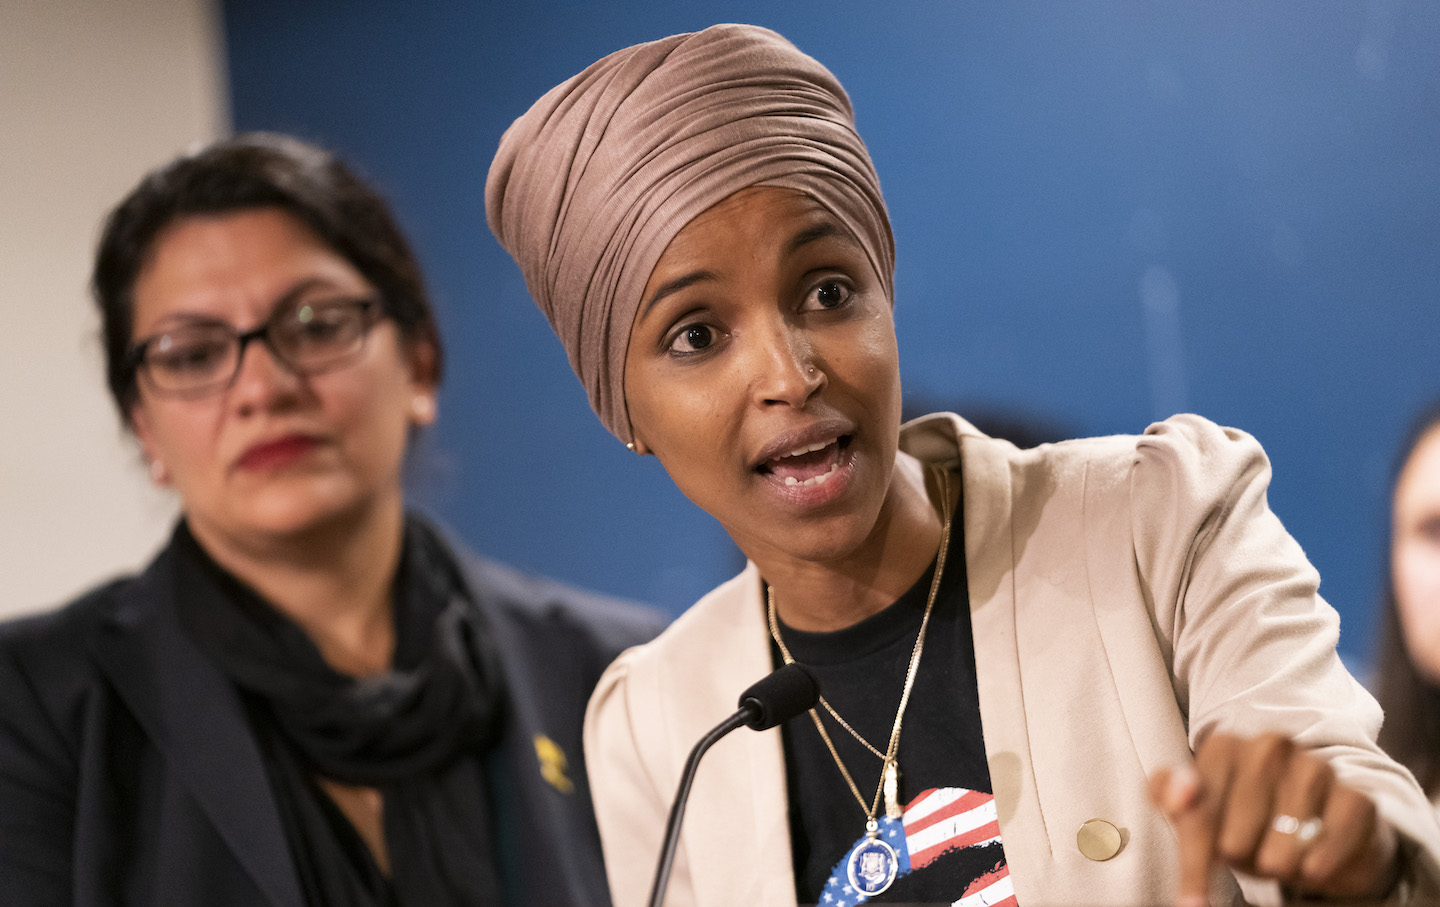 Reps. Ilhan Omar and Rashida Tlaib hosted a press conference on travel restrictions to Palestine and Israel.